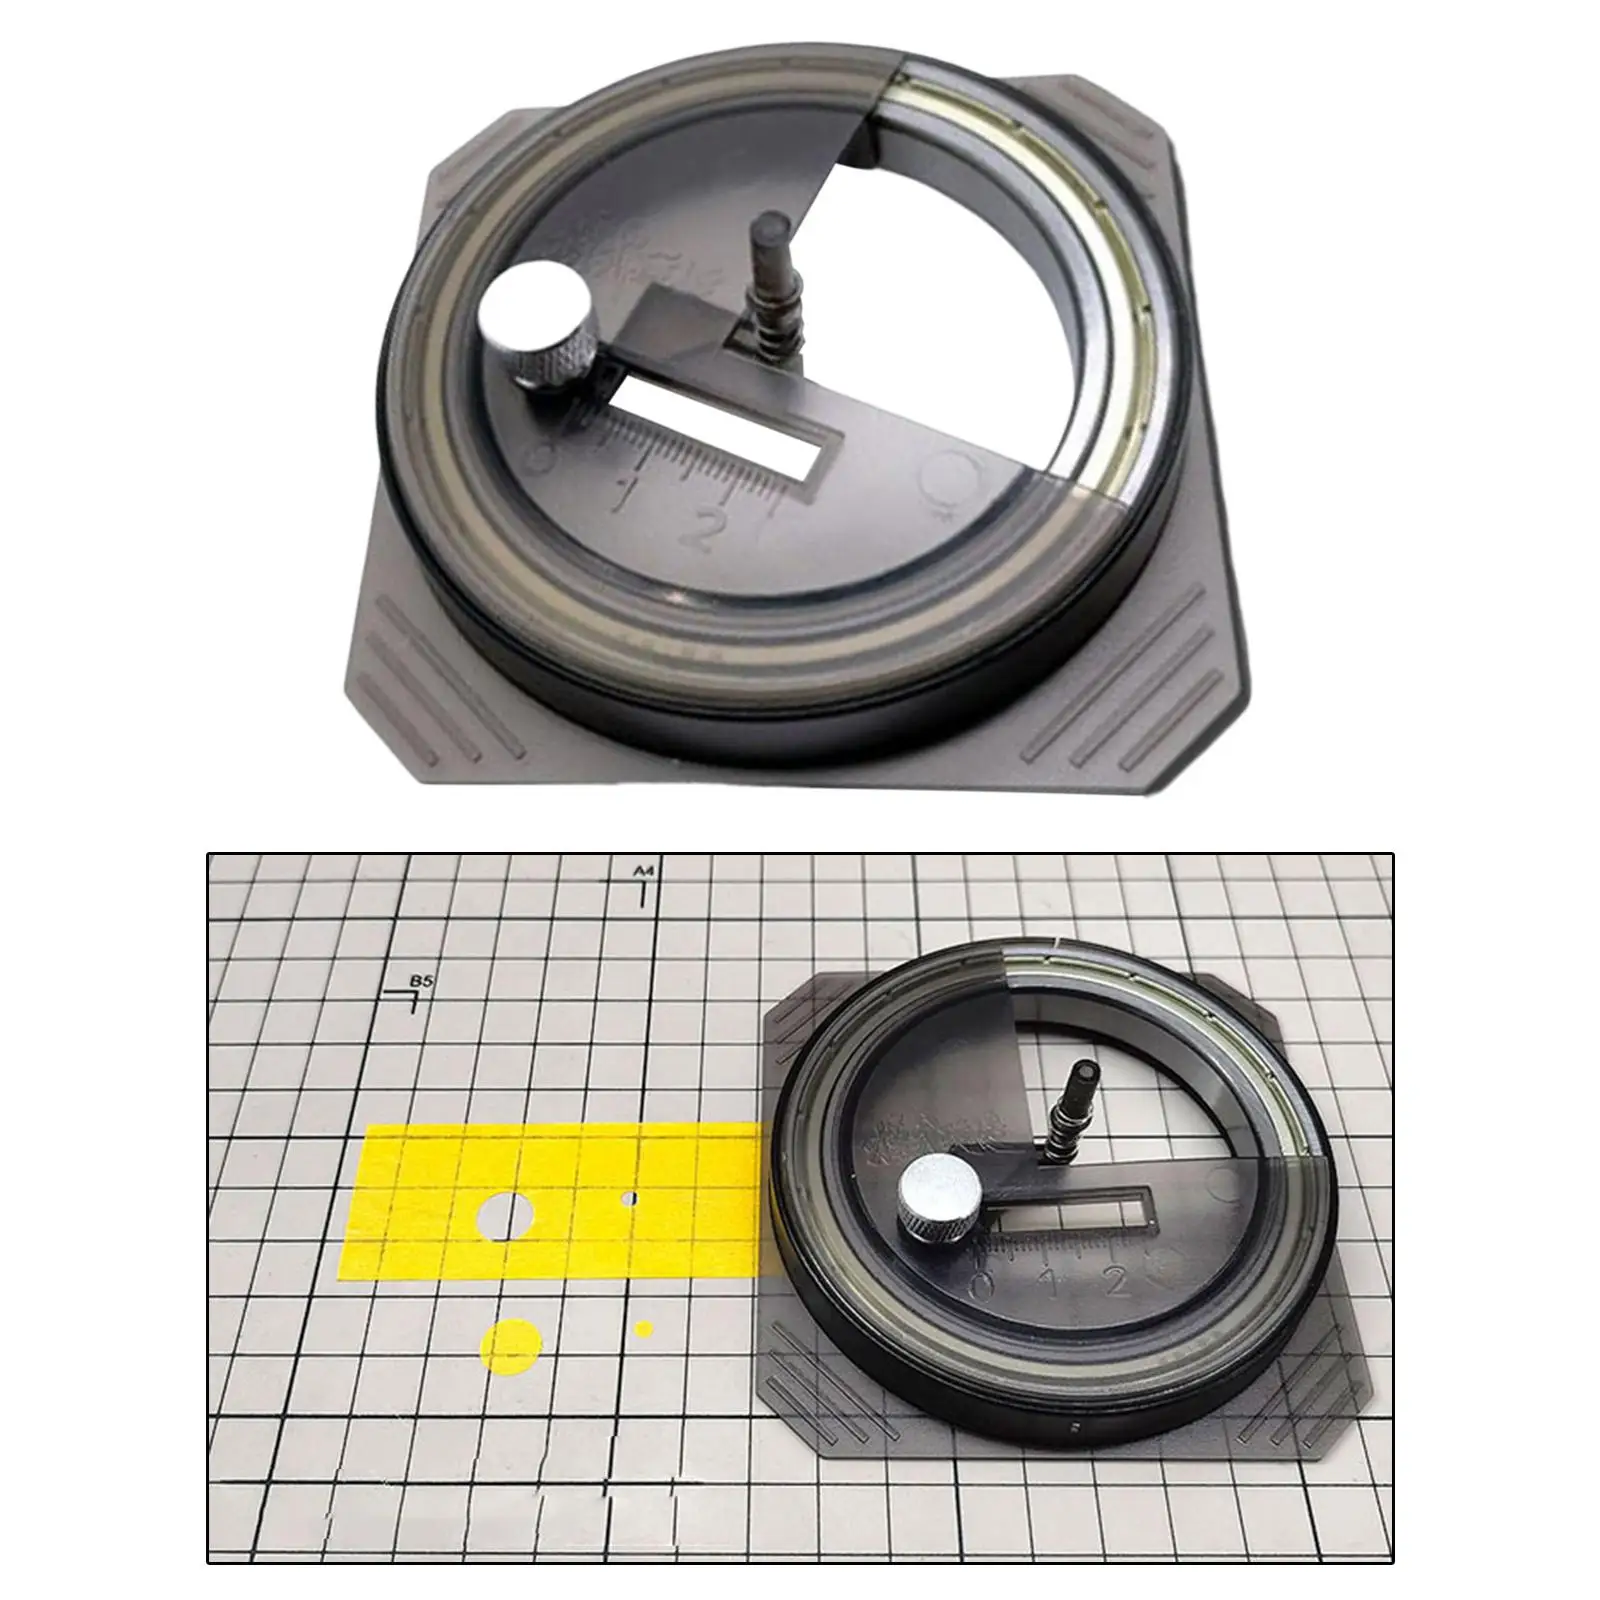 MS-075 Circular Cutter  Adjustment for   Model Hobby Tools  Making